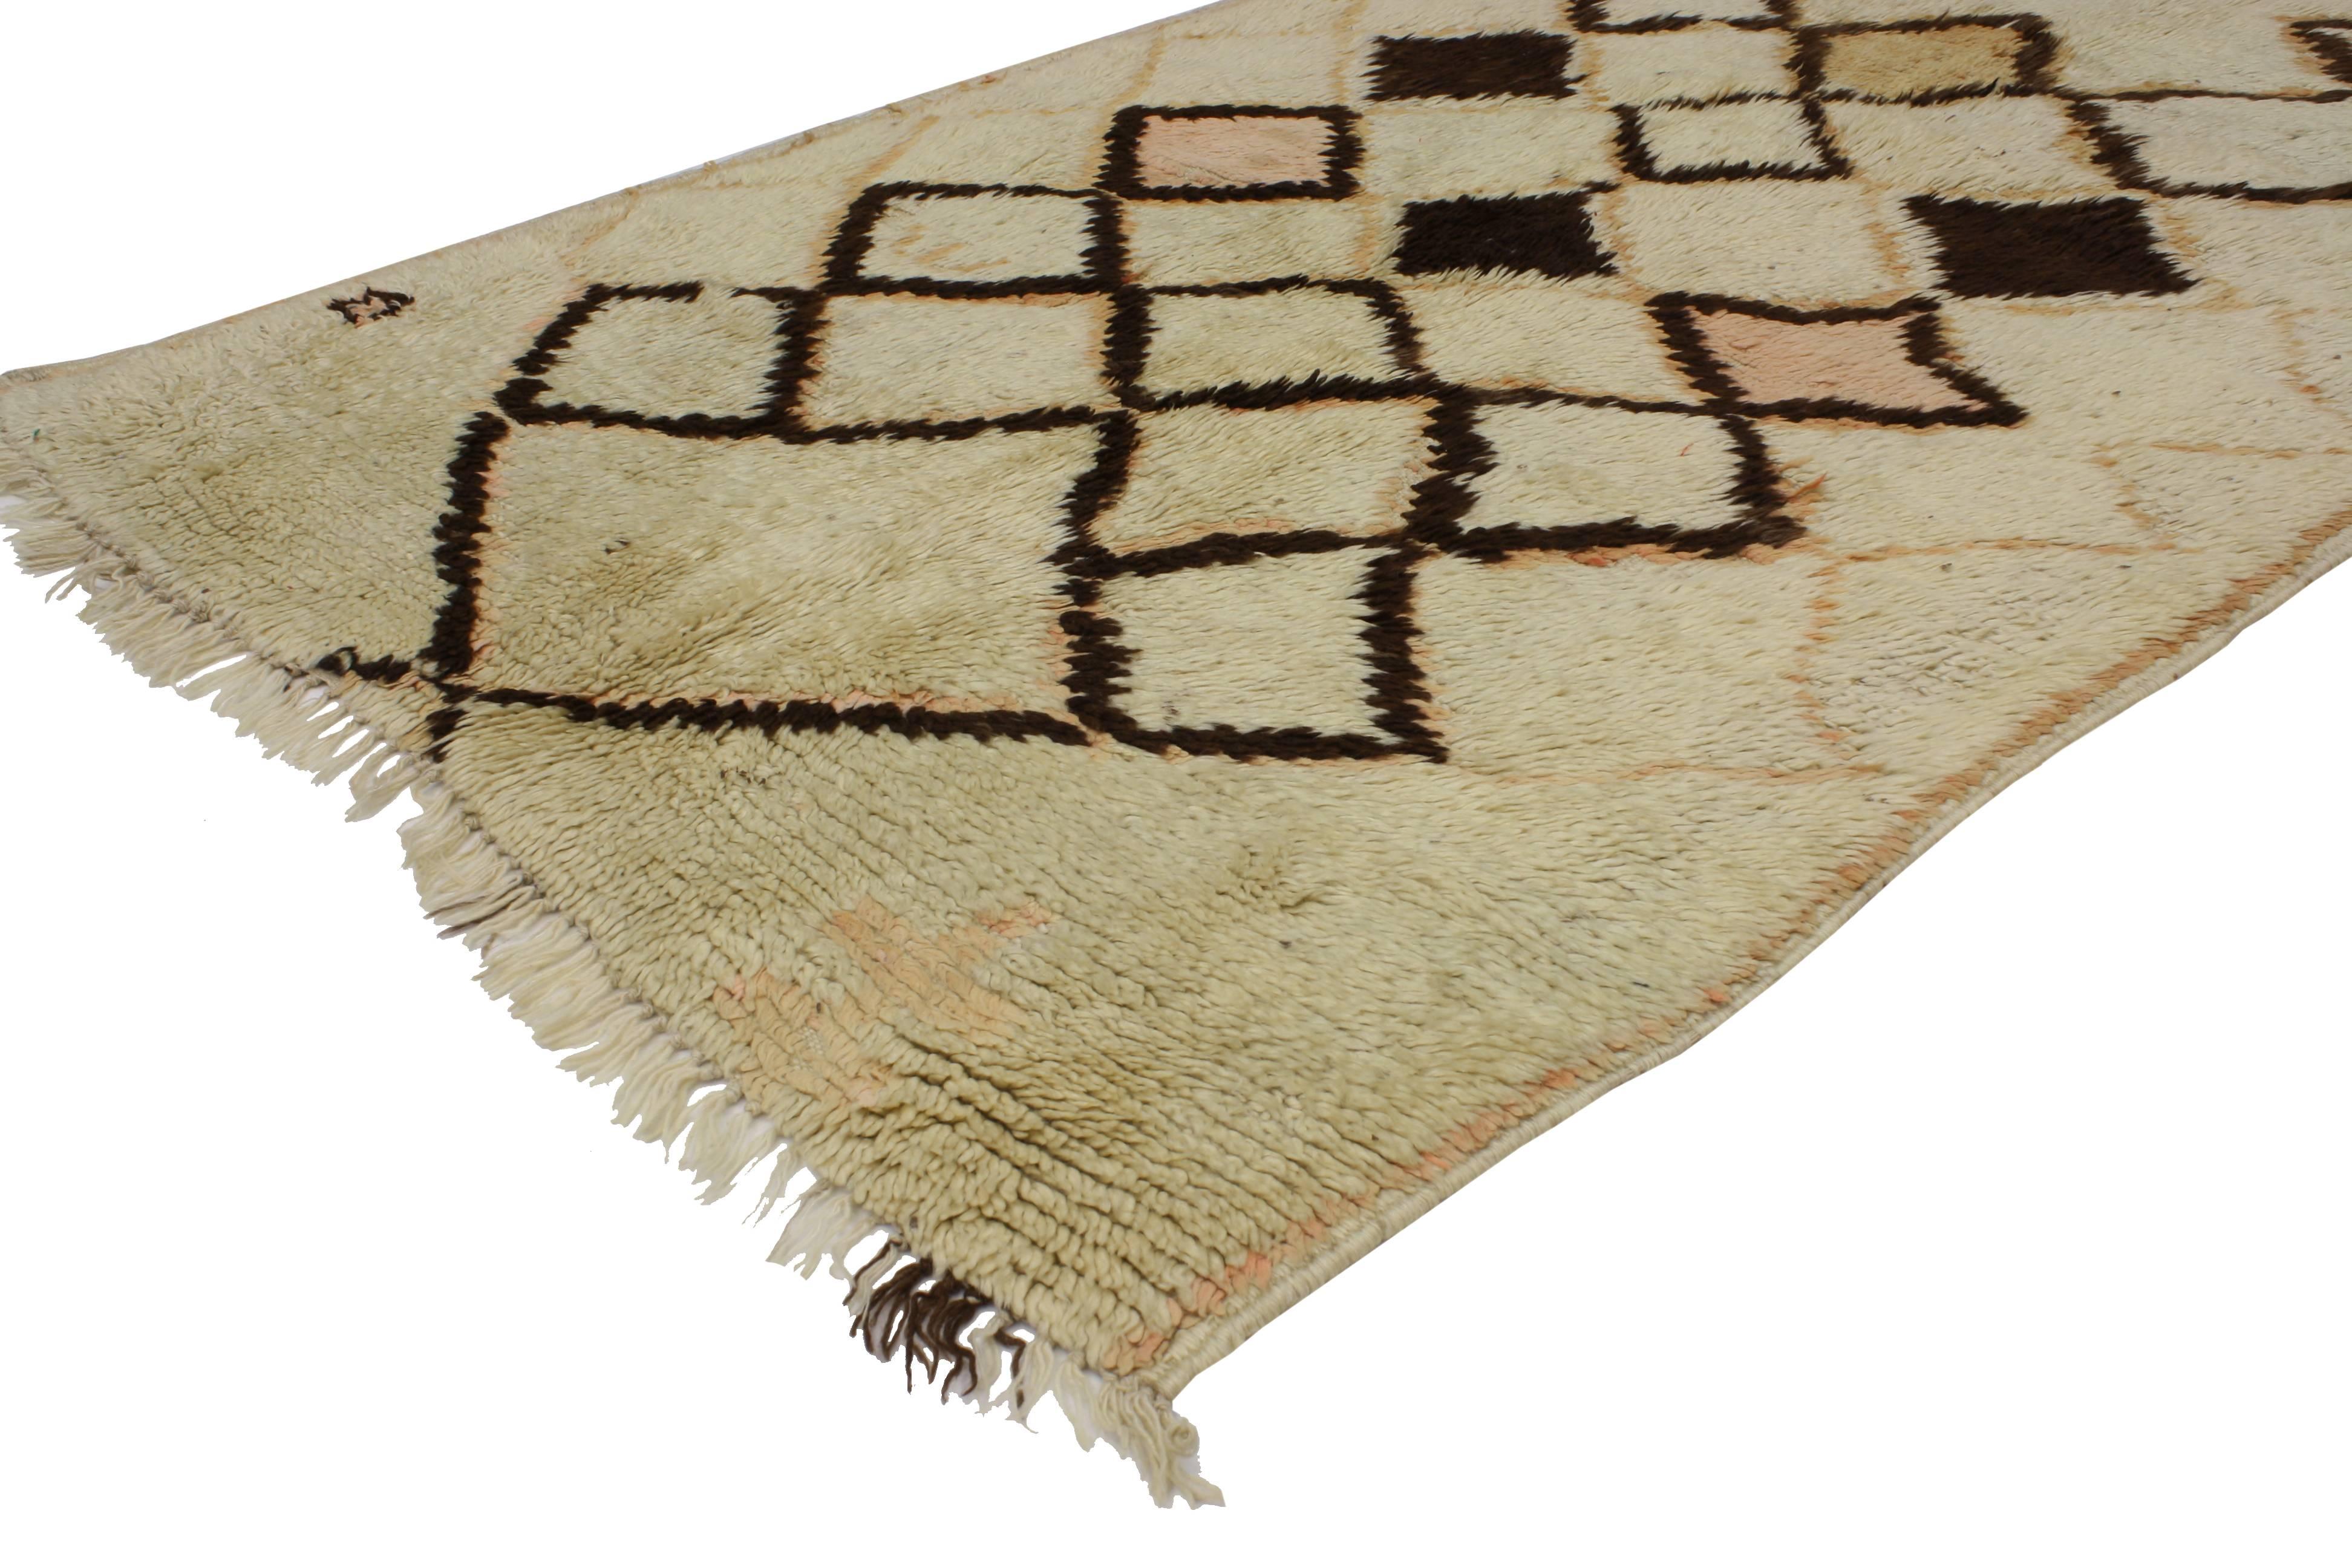 20389 Vintage Berber Moroccan Rug with Nomadic Style. With its stylish levels of complexity combined with Folk Art creativity, this hand-knotted wool vintage Berber Moroccan rug features nomadic style in muted hues and contrasting colors. The